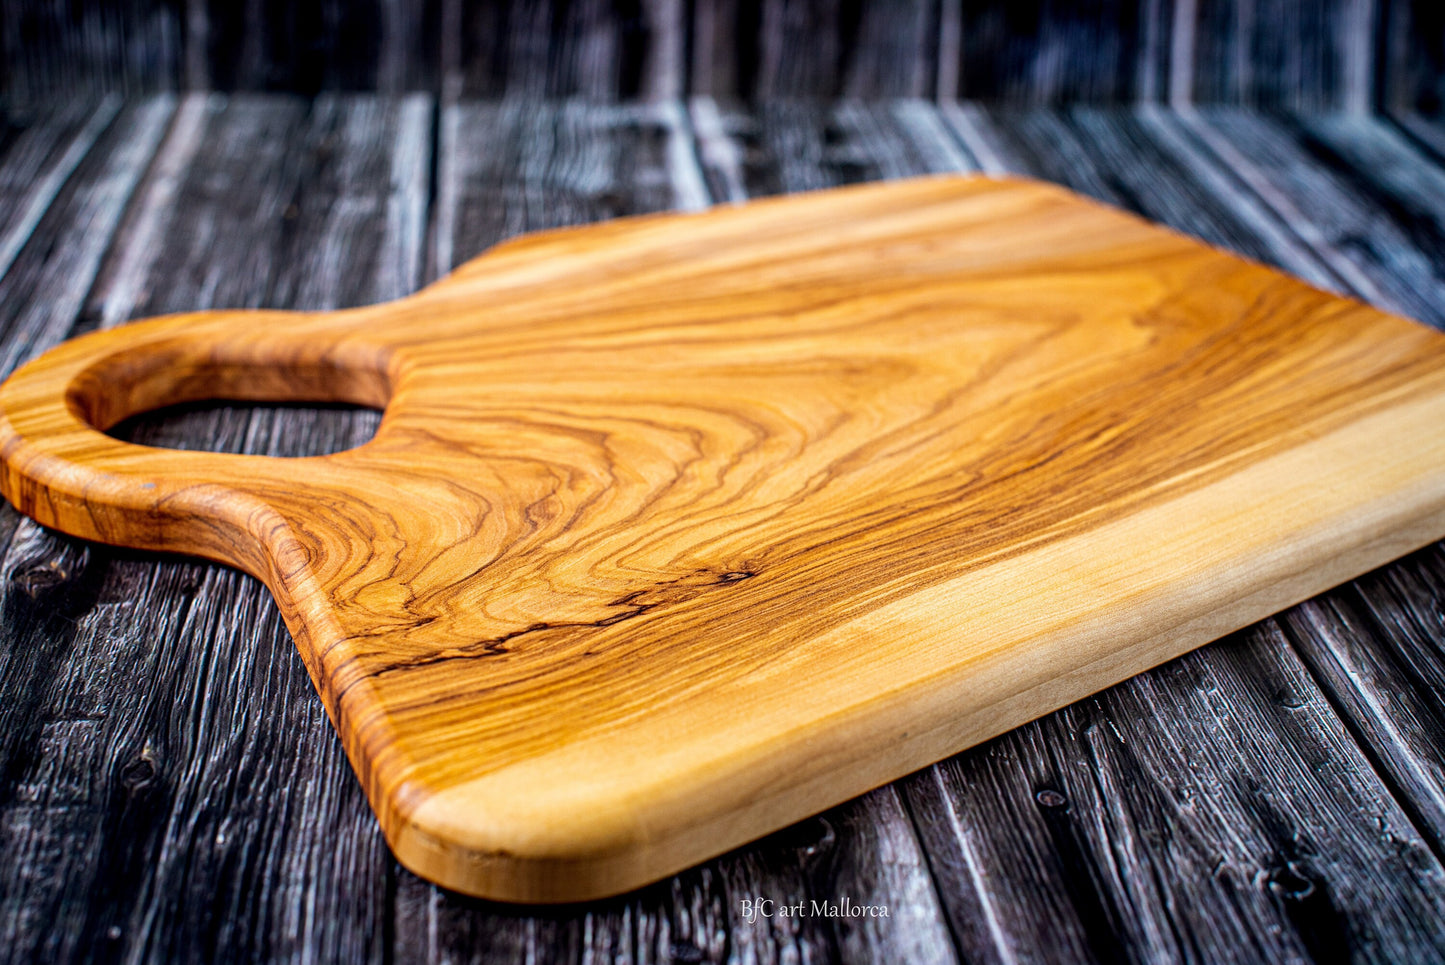 Cutting Board With Handle Olive Wood, Cutting Boards Mallorca design, Olive Wood Cutting Board for Meat And Cheese Tray, Bread Slicer, Cheese Board